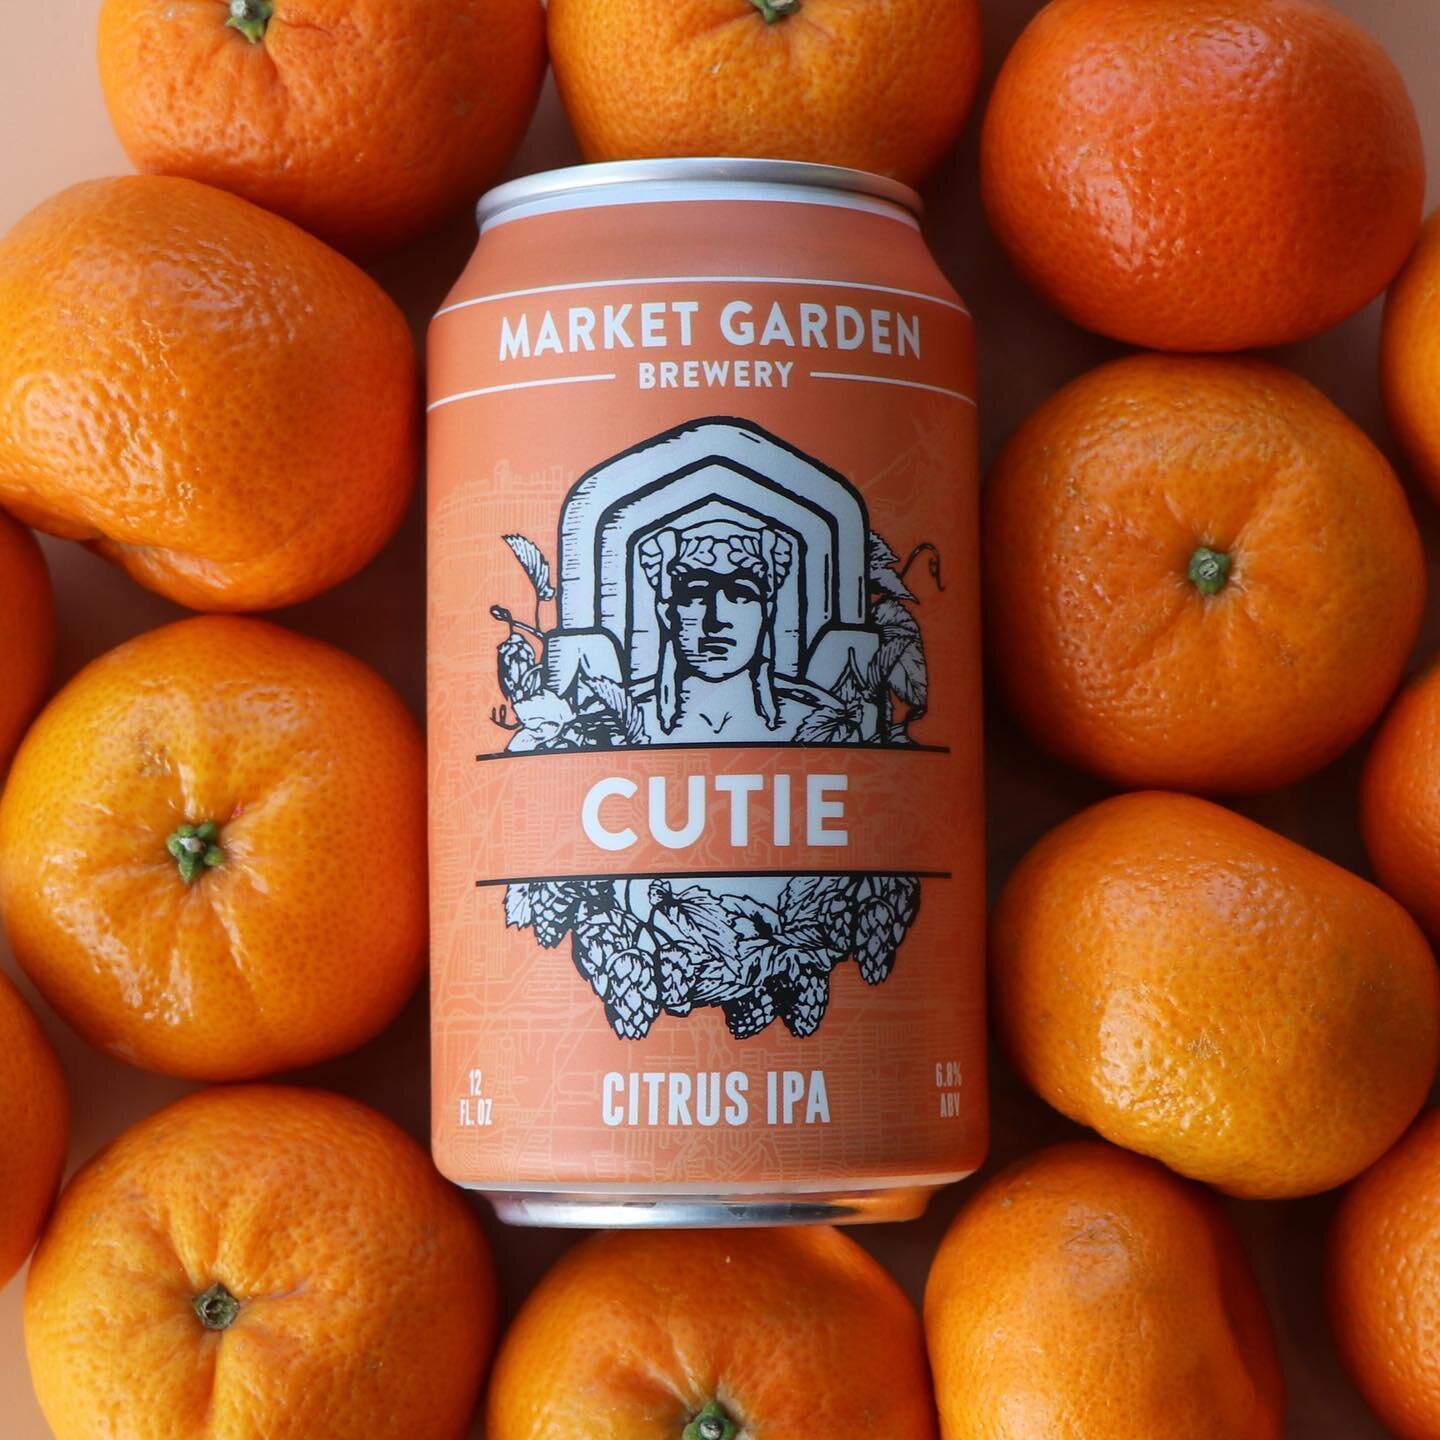 Cutie Citrus IPA is now available on draft at @marketgardenbrewpub plus 6-packs at the Brewery Store! Stop in and be the first to try our new seasonal brew🍻🍊 

#beerforpeople #marketgardenbrewery #ohiocity #ohiocraftbeer #drinkbeermadehere